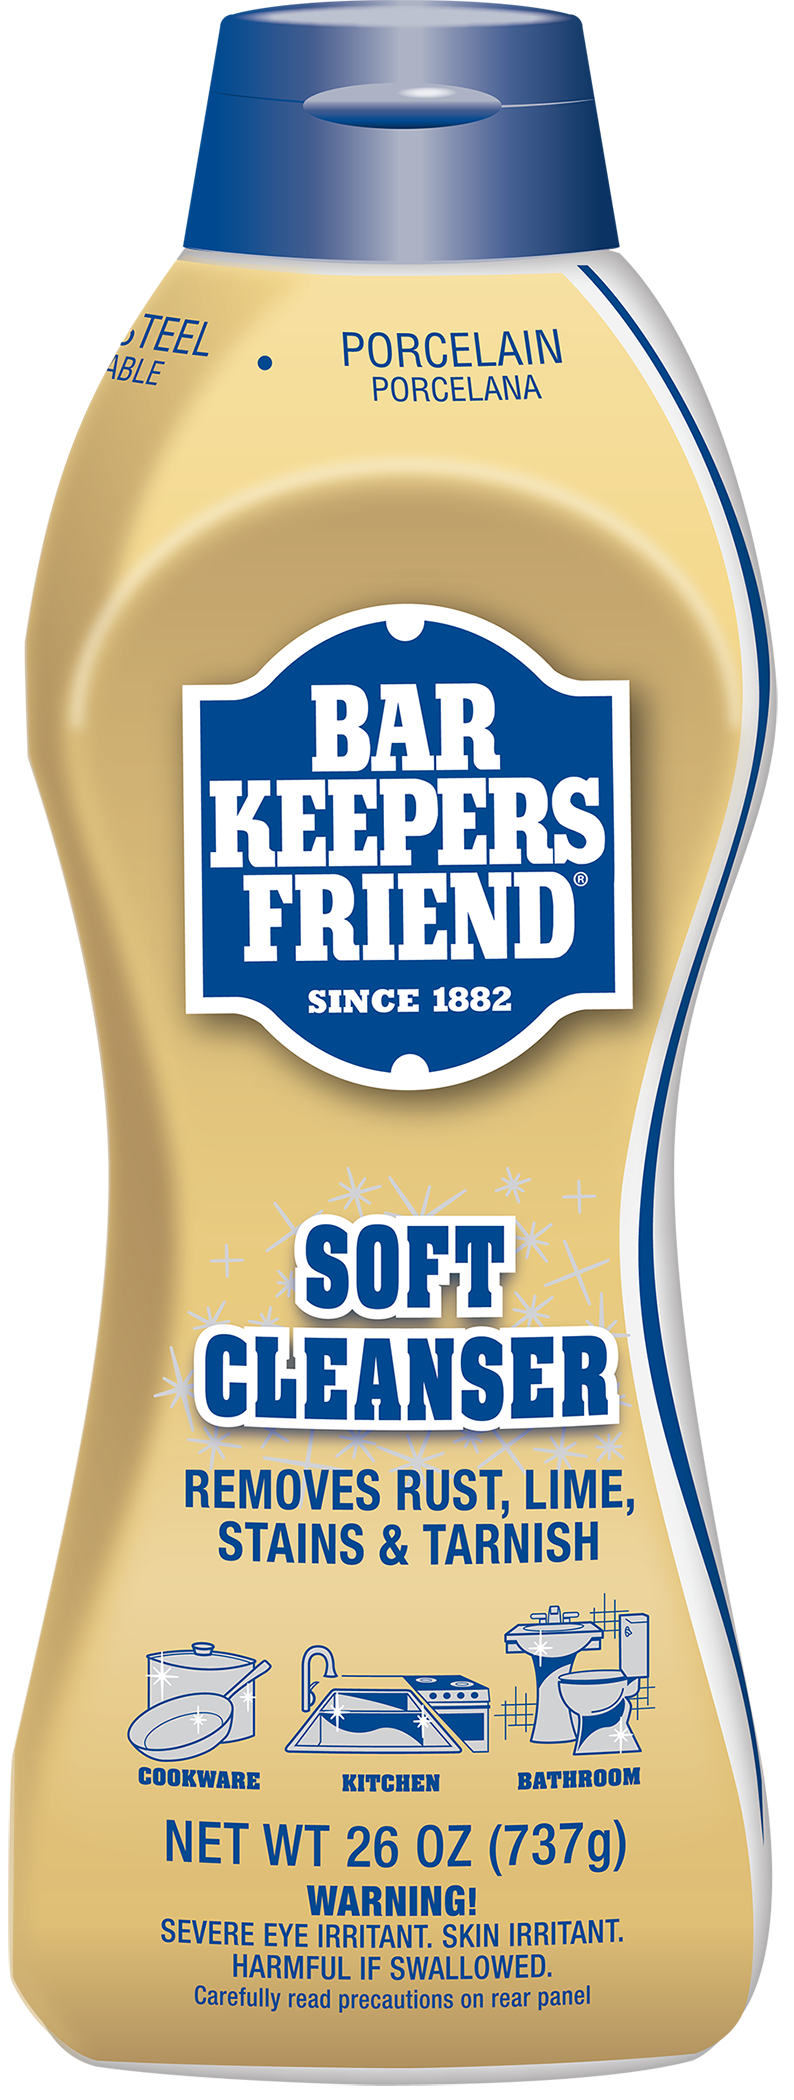 Bar Keepers Friend Original Stain Remover Powder